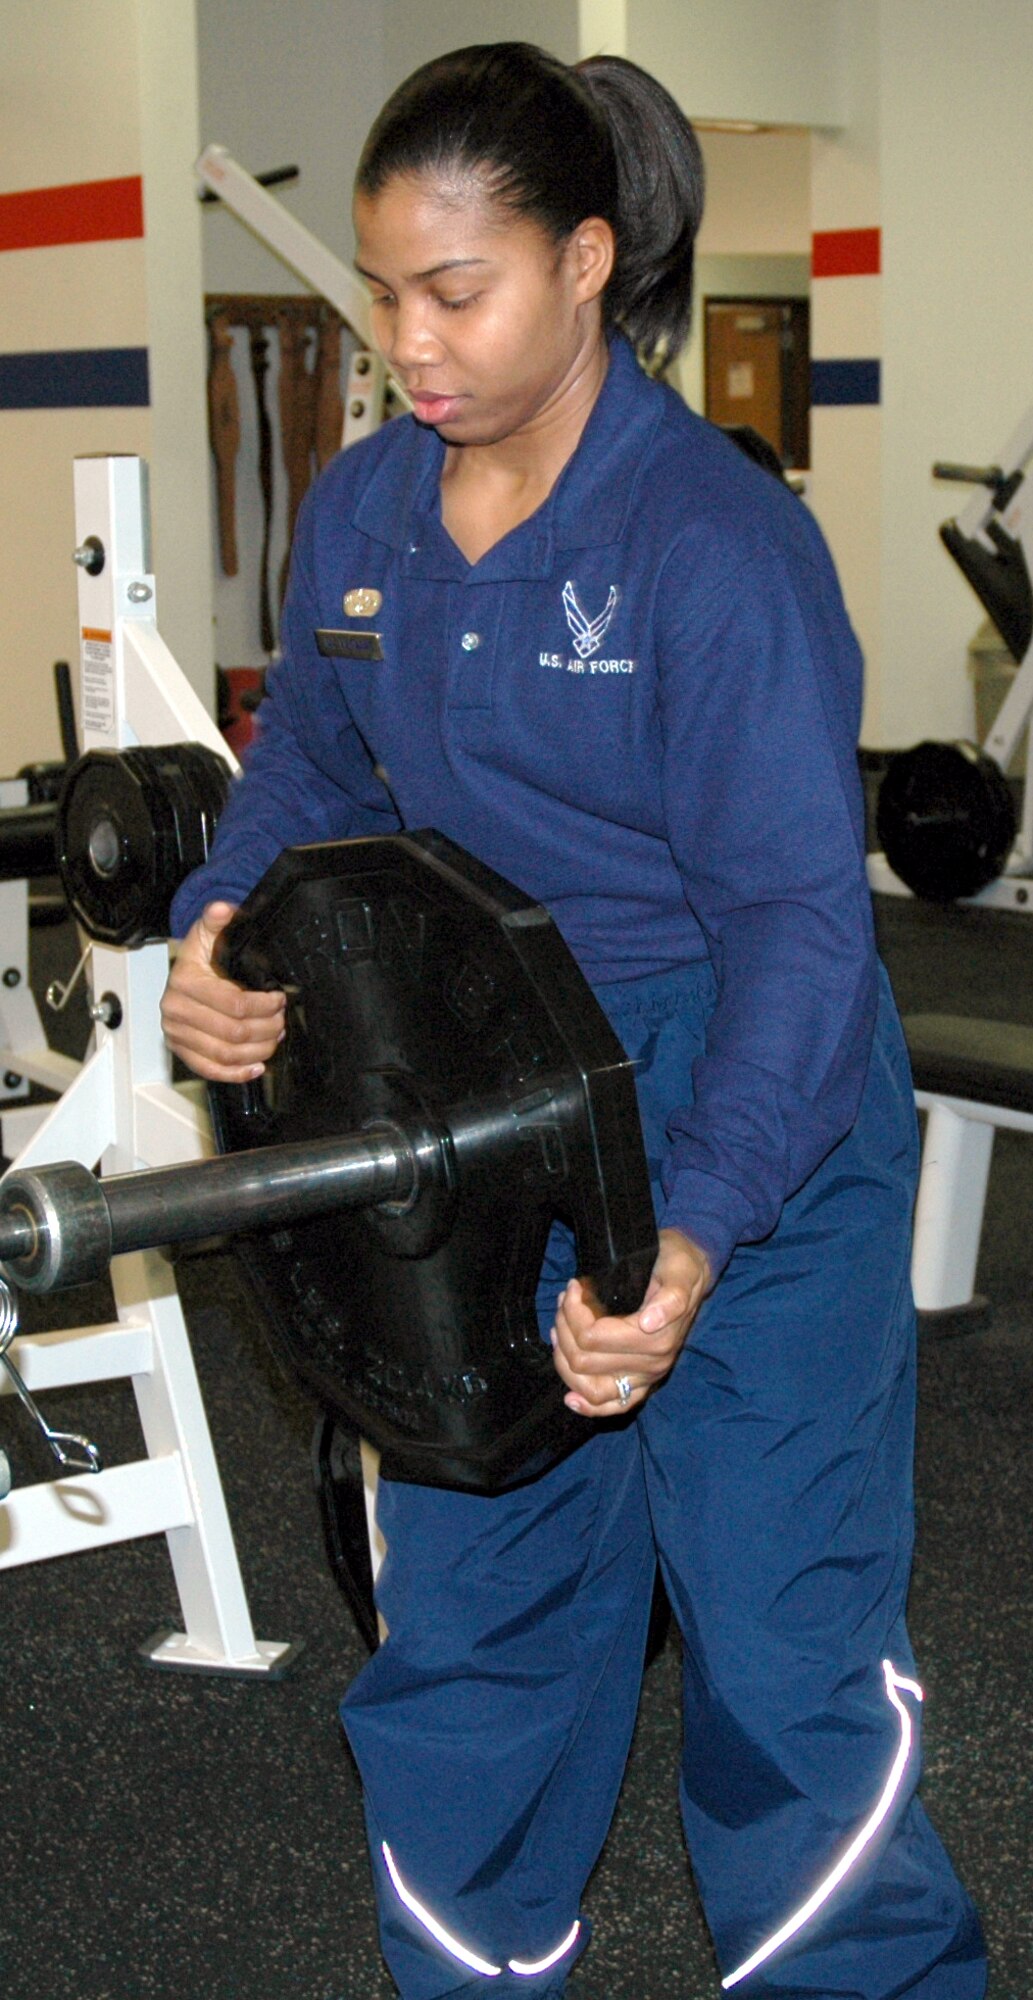 Senior Airman Chanice Leonard, a fitness specialist with the 341st Services Squadron, removes weight plates from the bar in the weight room at the Sports and Fitness Center. Airman Leonard will be working on New Year's Day. (U.S. Air Force photo/Valerie Mullett)